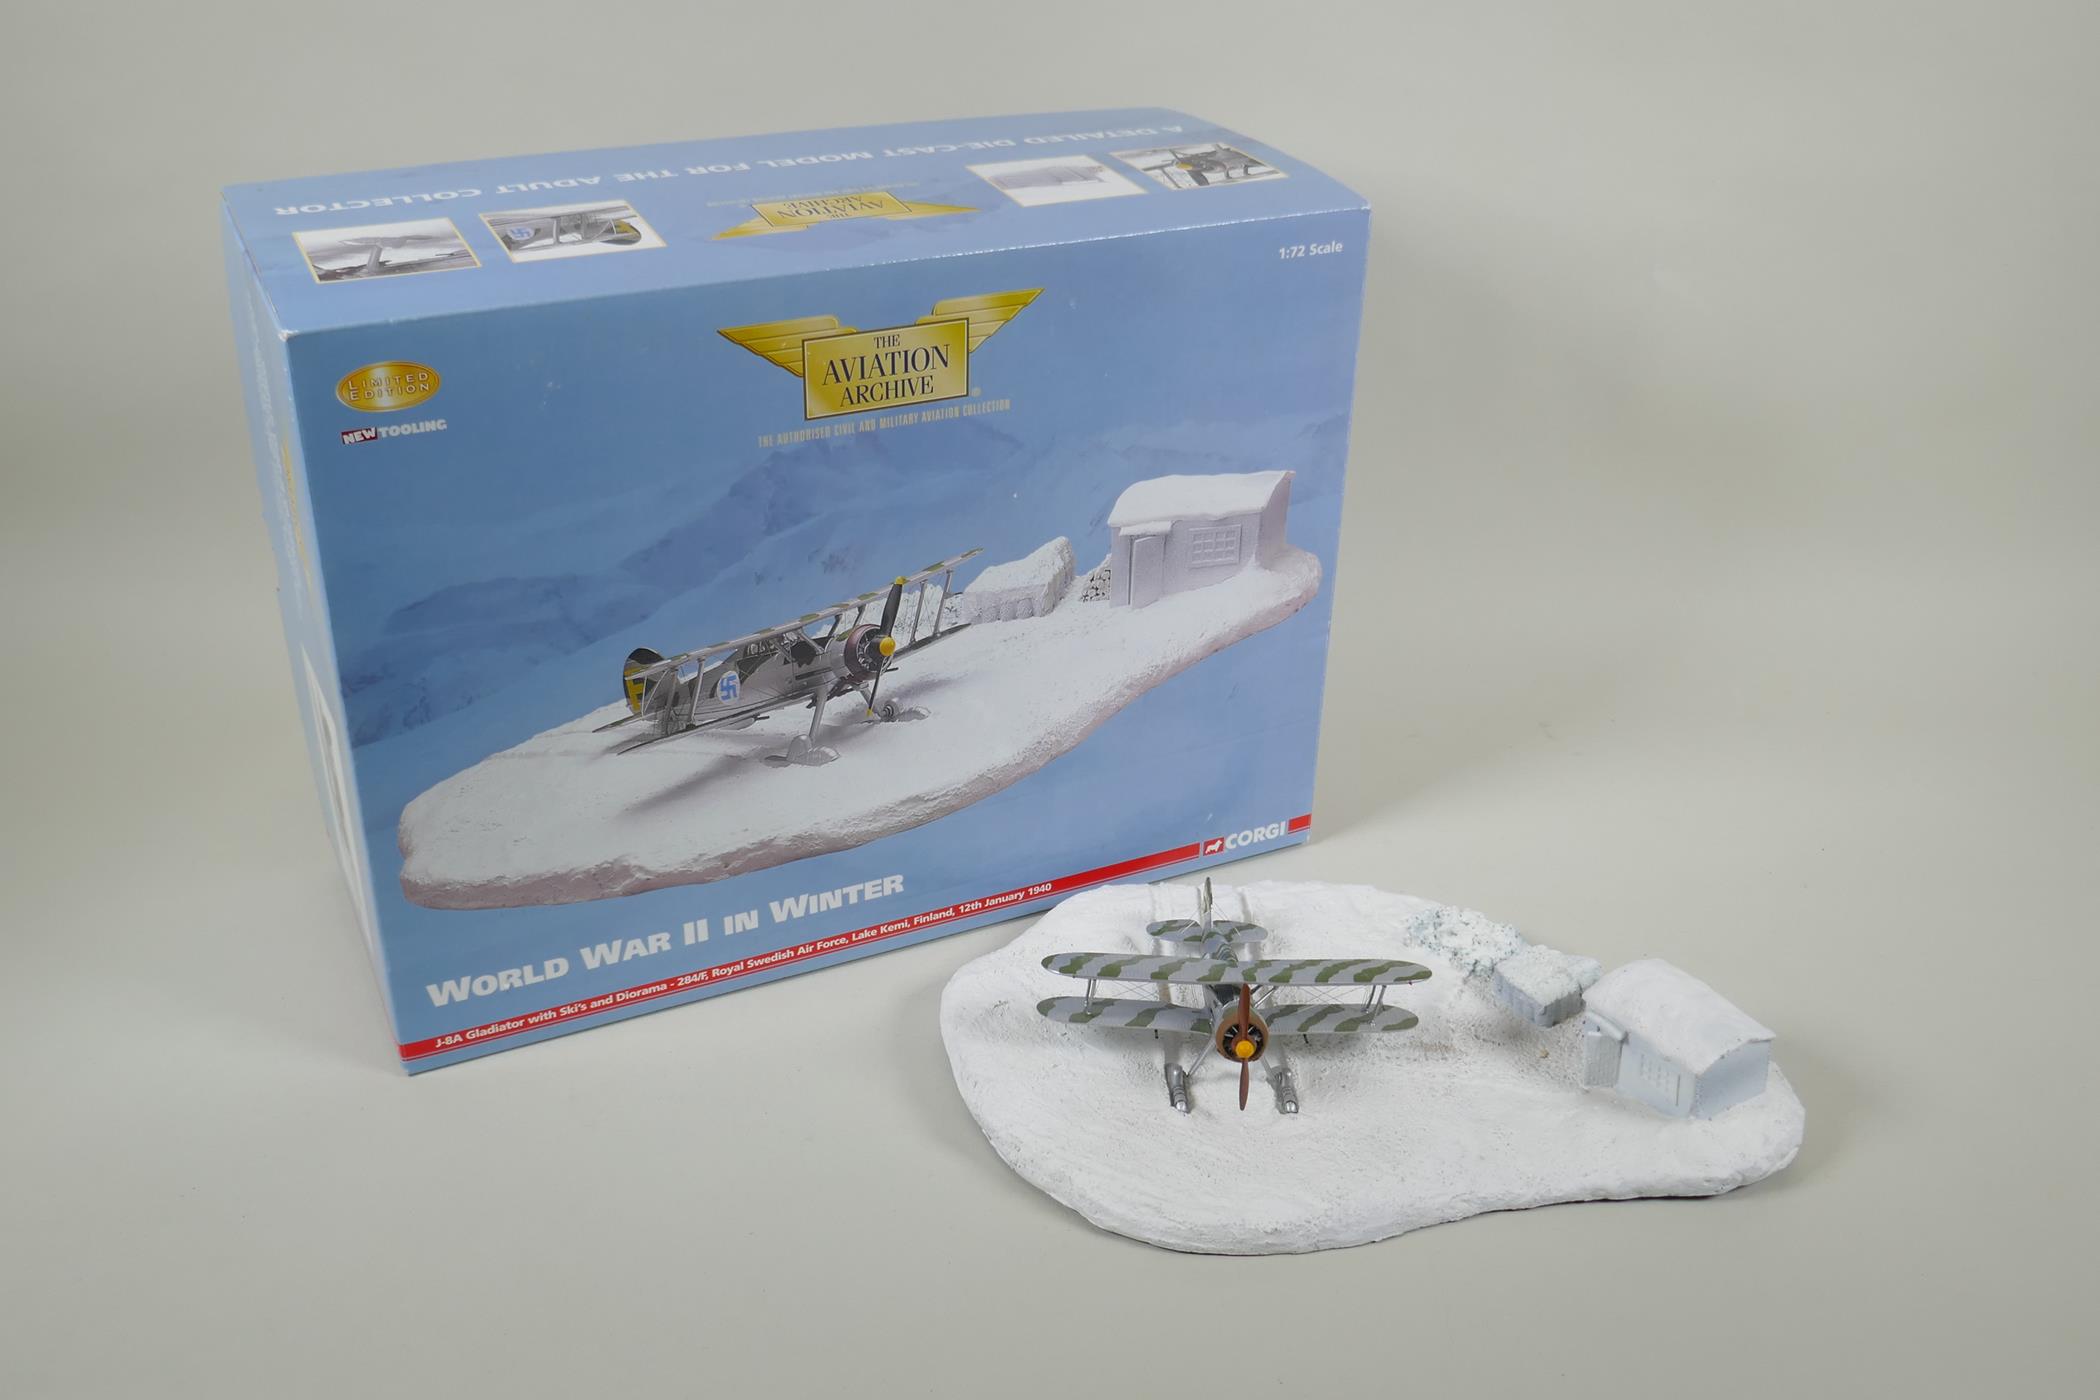 Two Corgi Aviation Archive diecast 1:72 scale models, including World War II/Atlantic By Night - Image 3 of 4